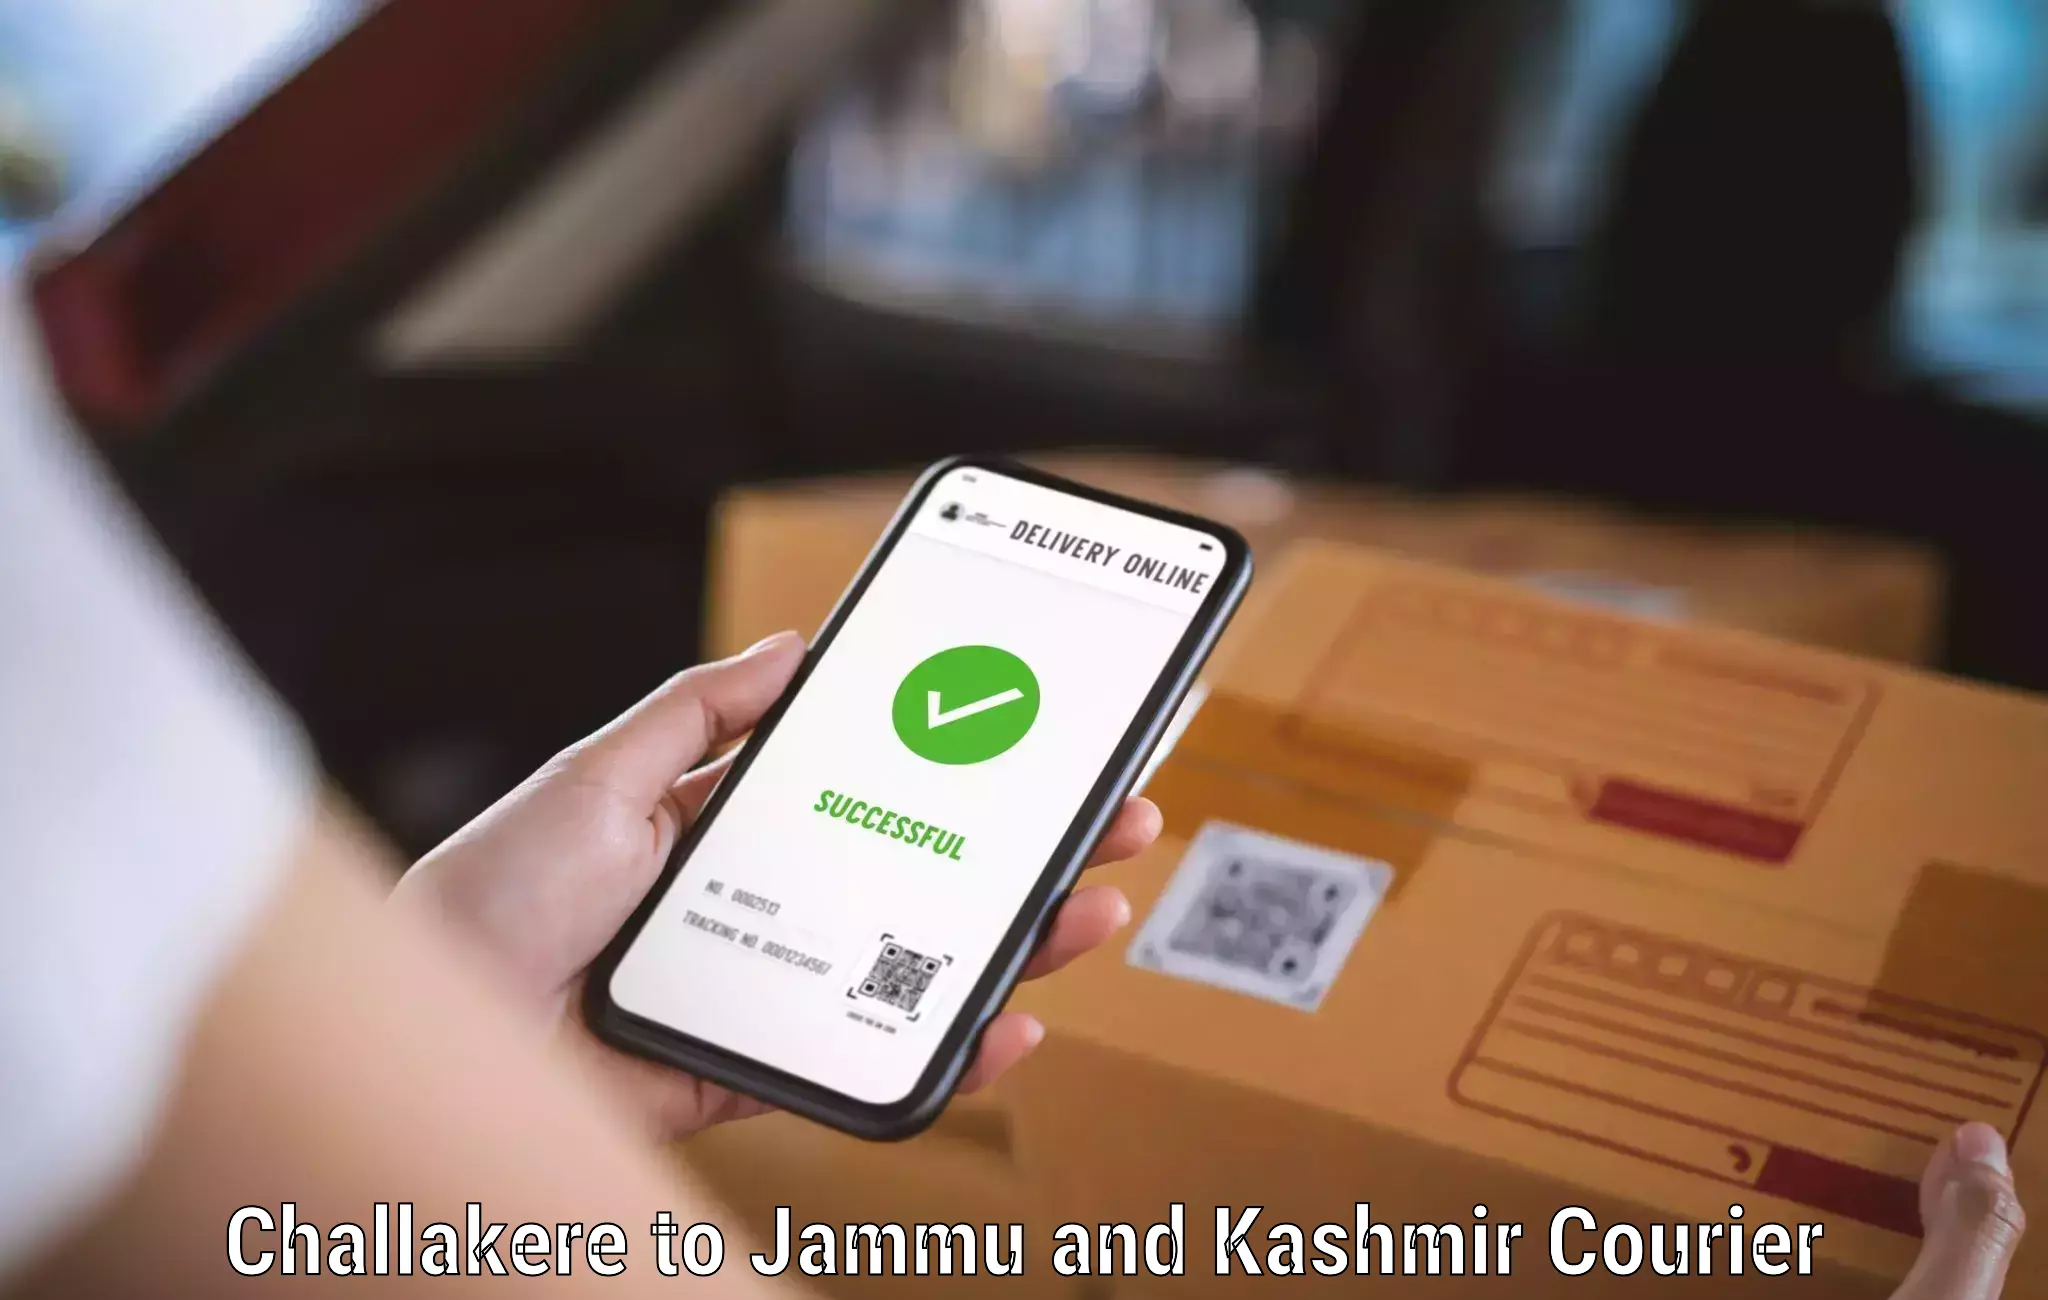 Courier service booking Challakere to Rajouri